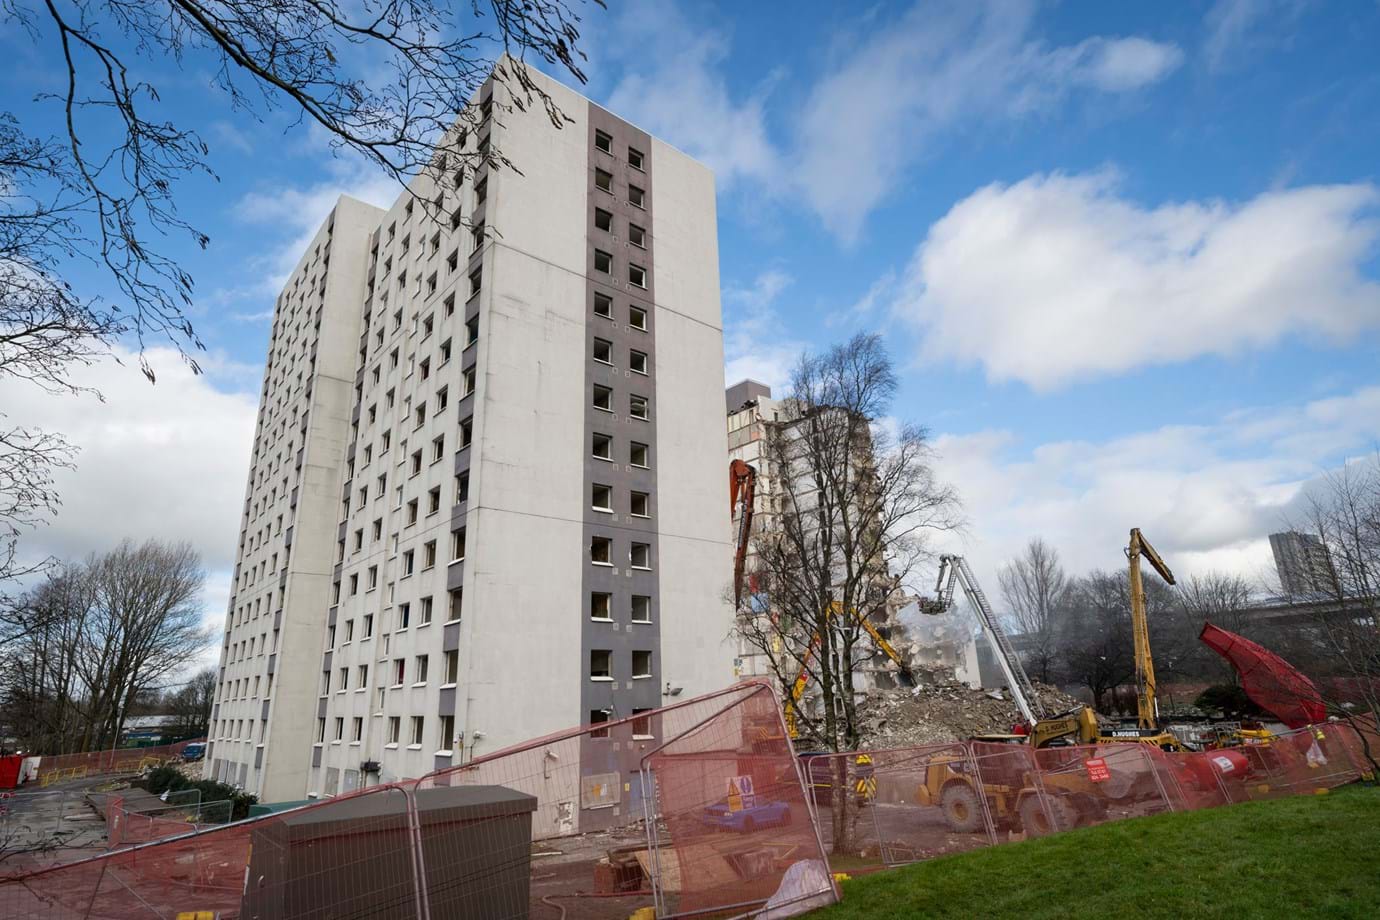 Work to demolish the tower blocks is being carried out by Oldham-based, specialist contractor D Hughes Demolition and Excavation Ltd which has experience and expertise in handling projects of this scale.